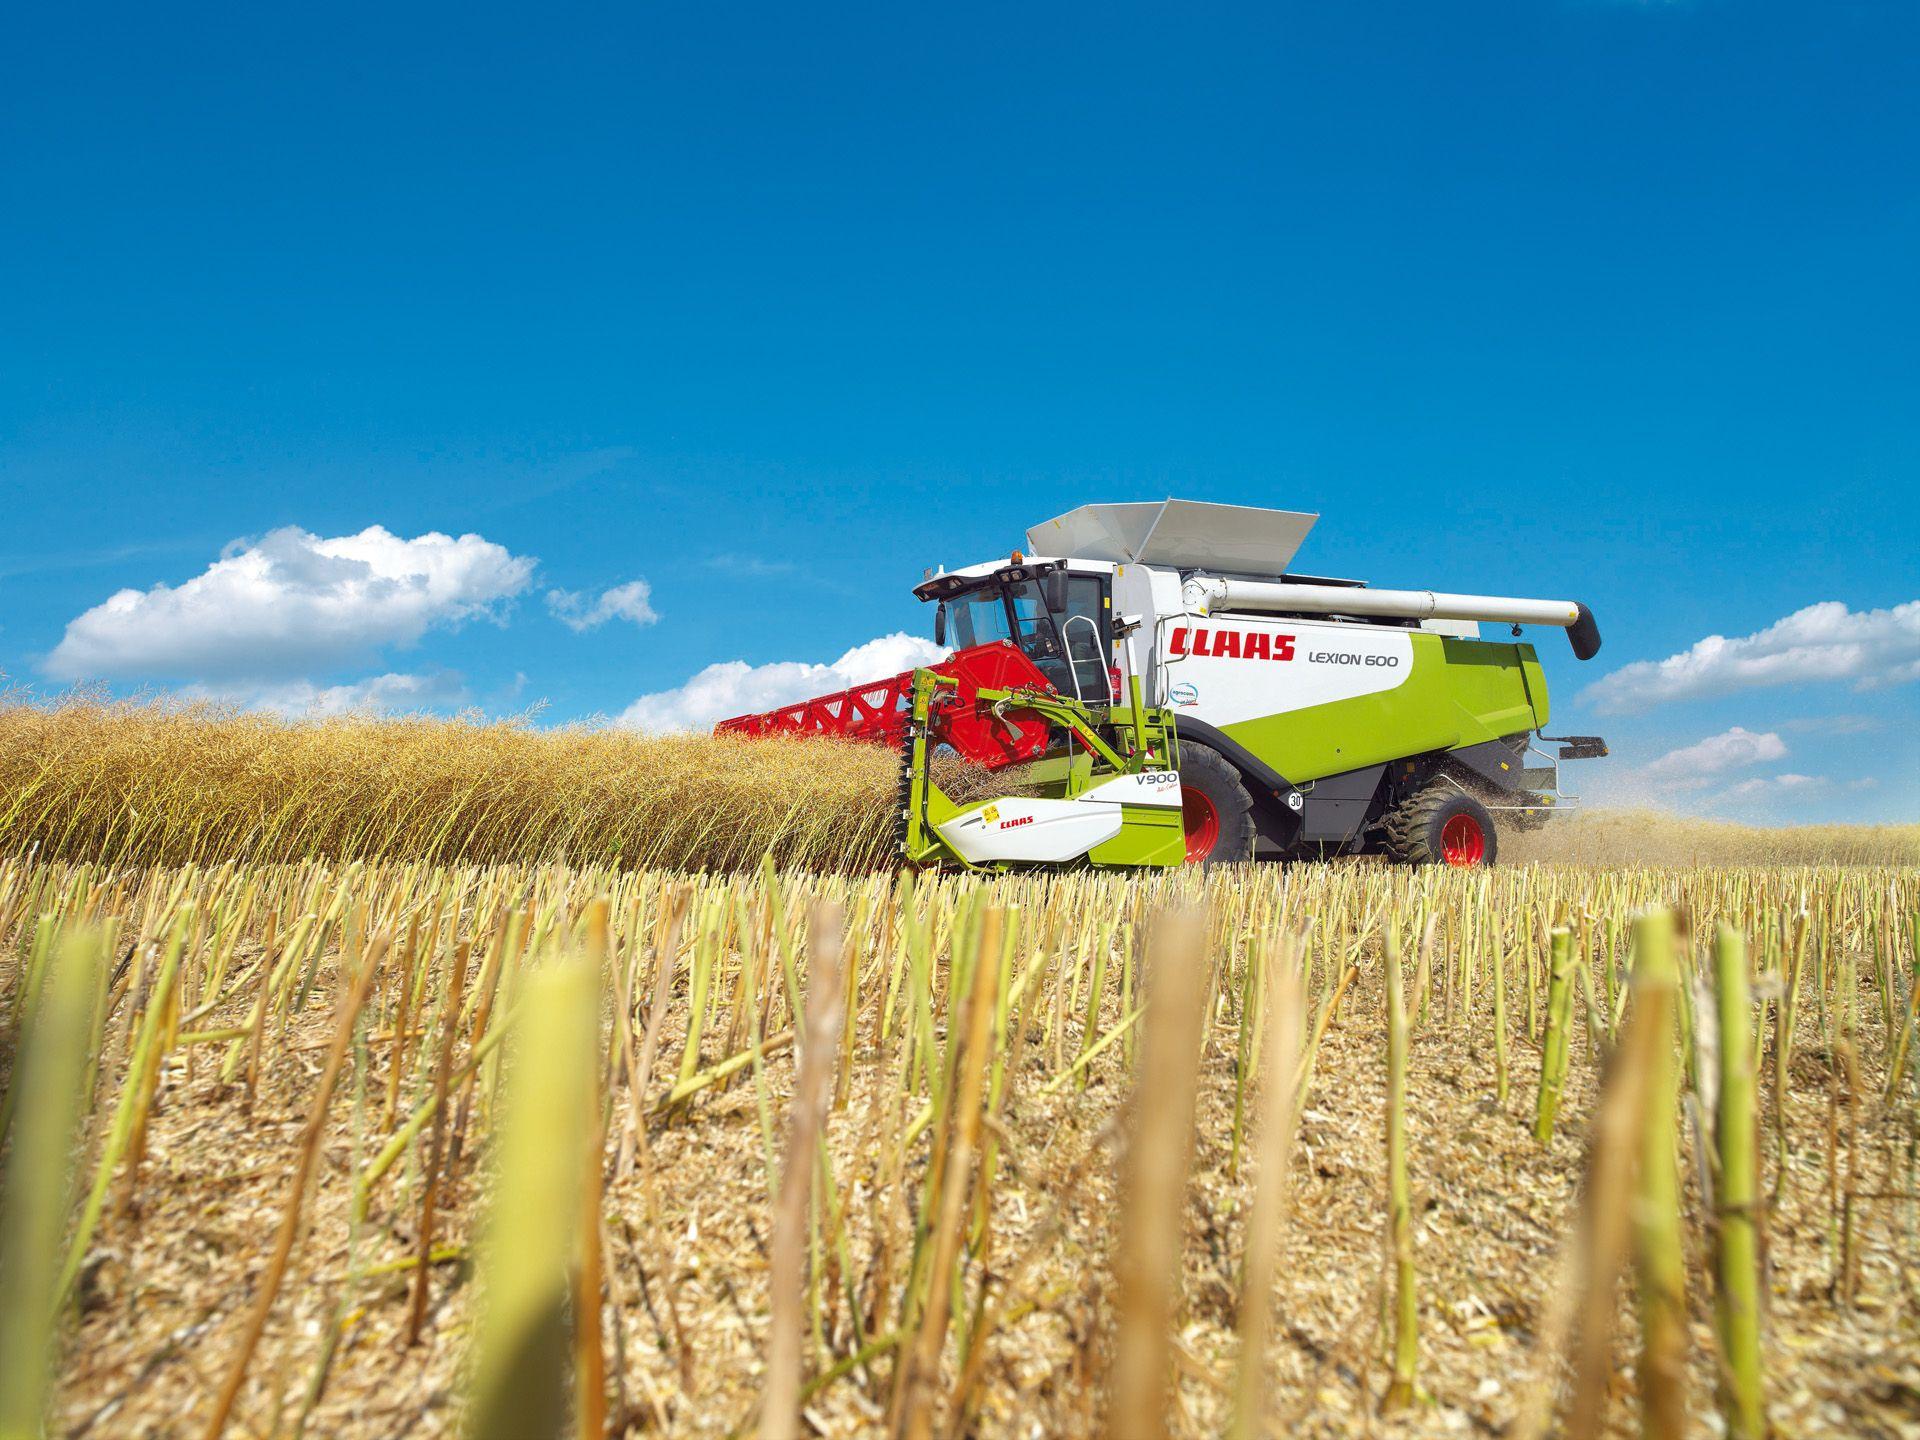 Claas Lexion picture # 54743. Claas photo gallery